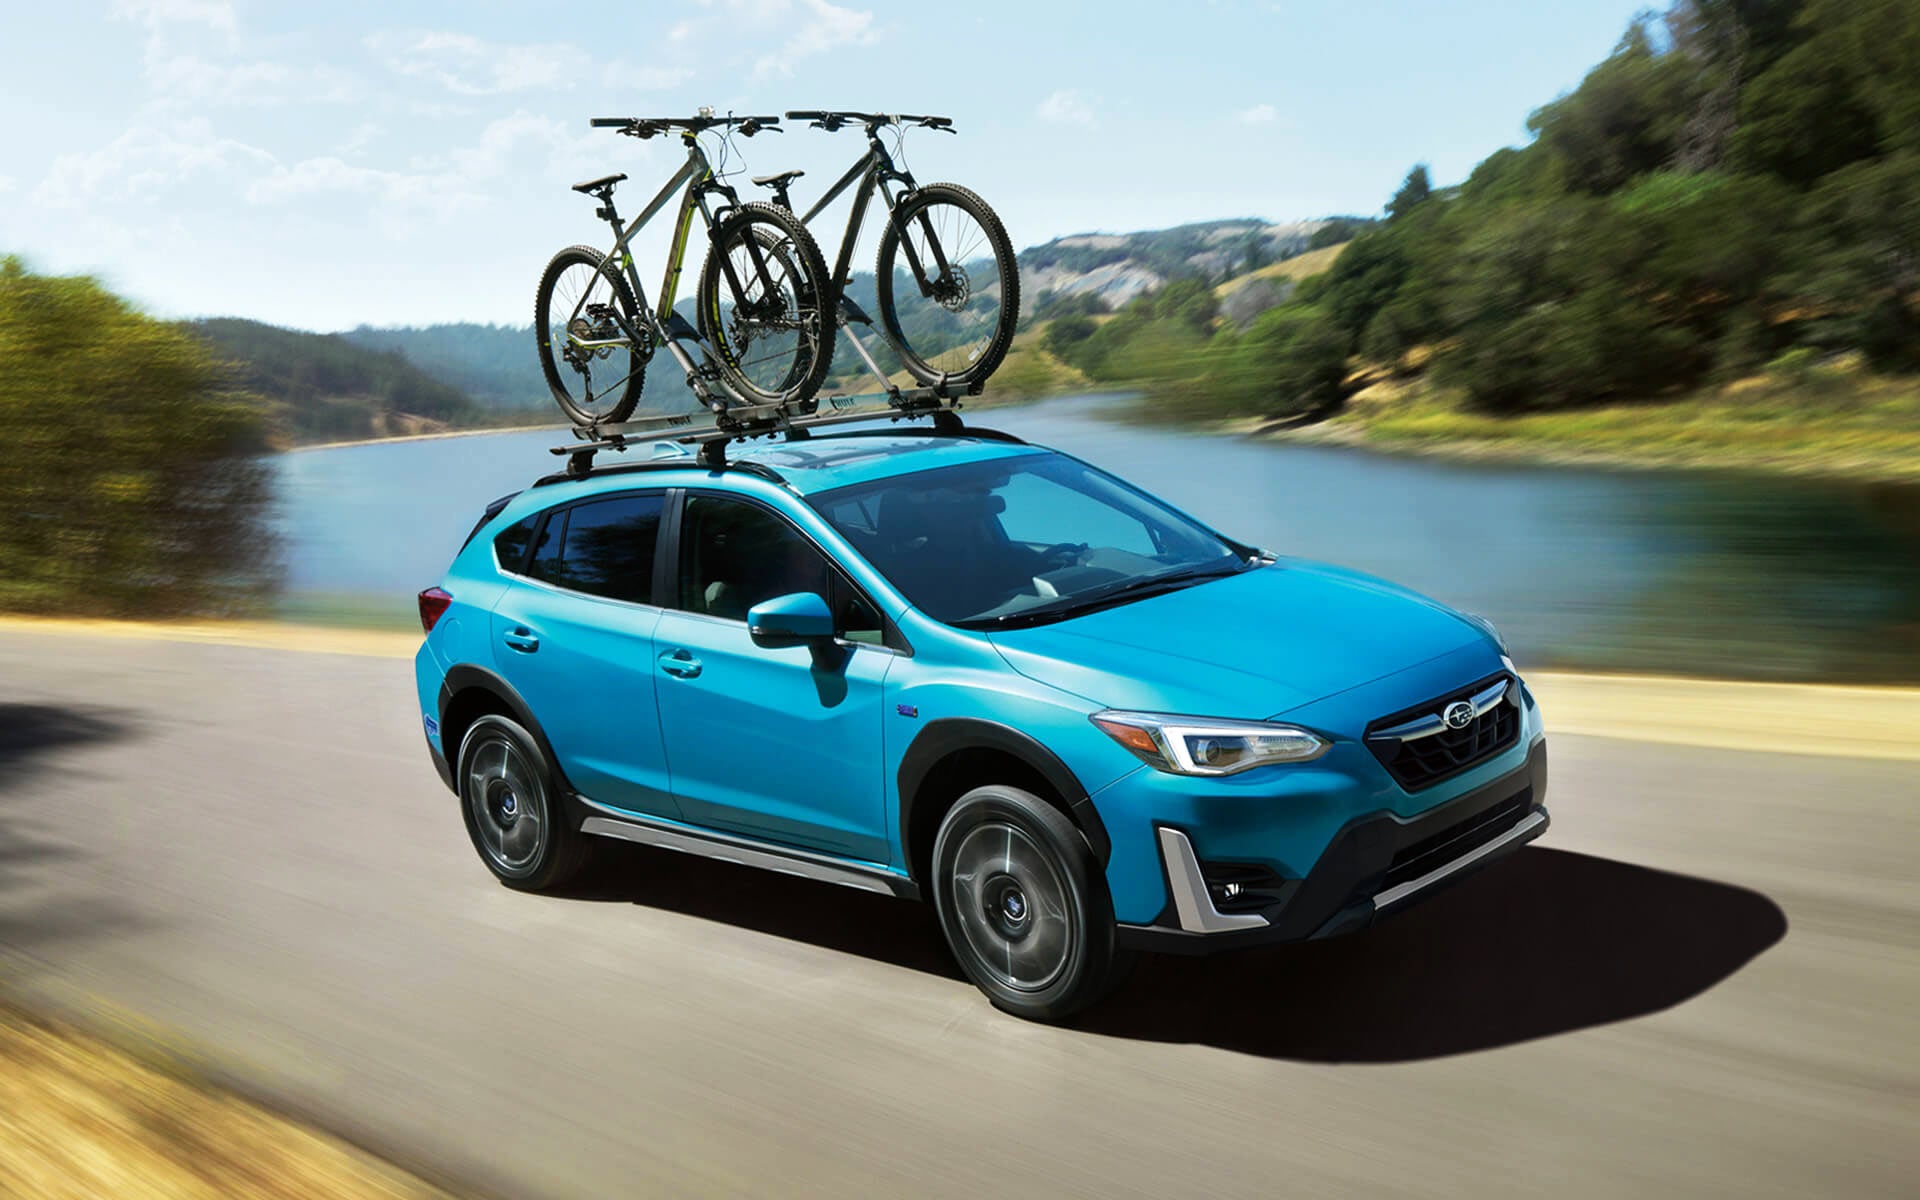 A blue Crosstrek Hybrid with two bicycles on its roof rack driving beside a river | Sierra Subaru of Monrovia in Monrovia CA